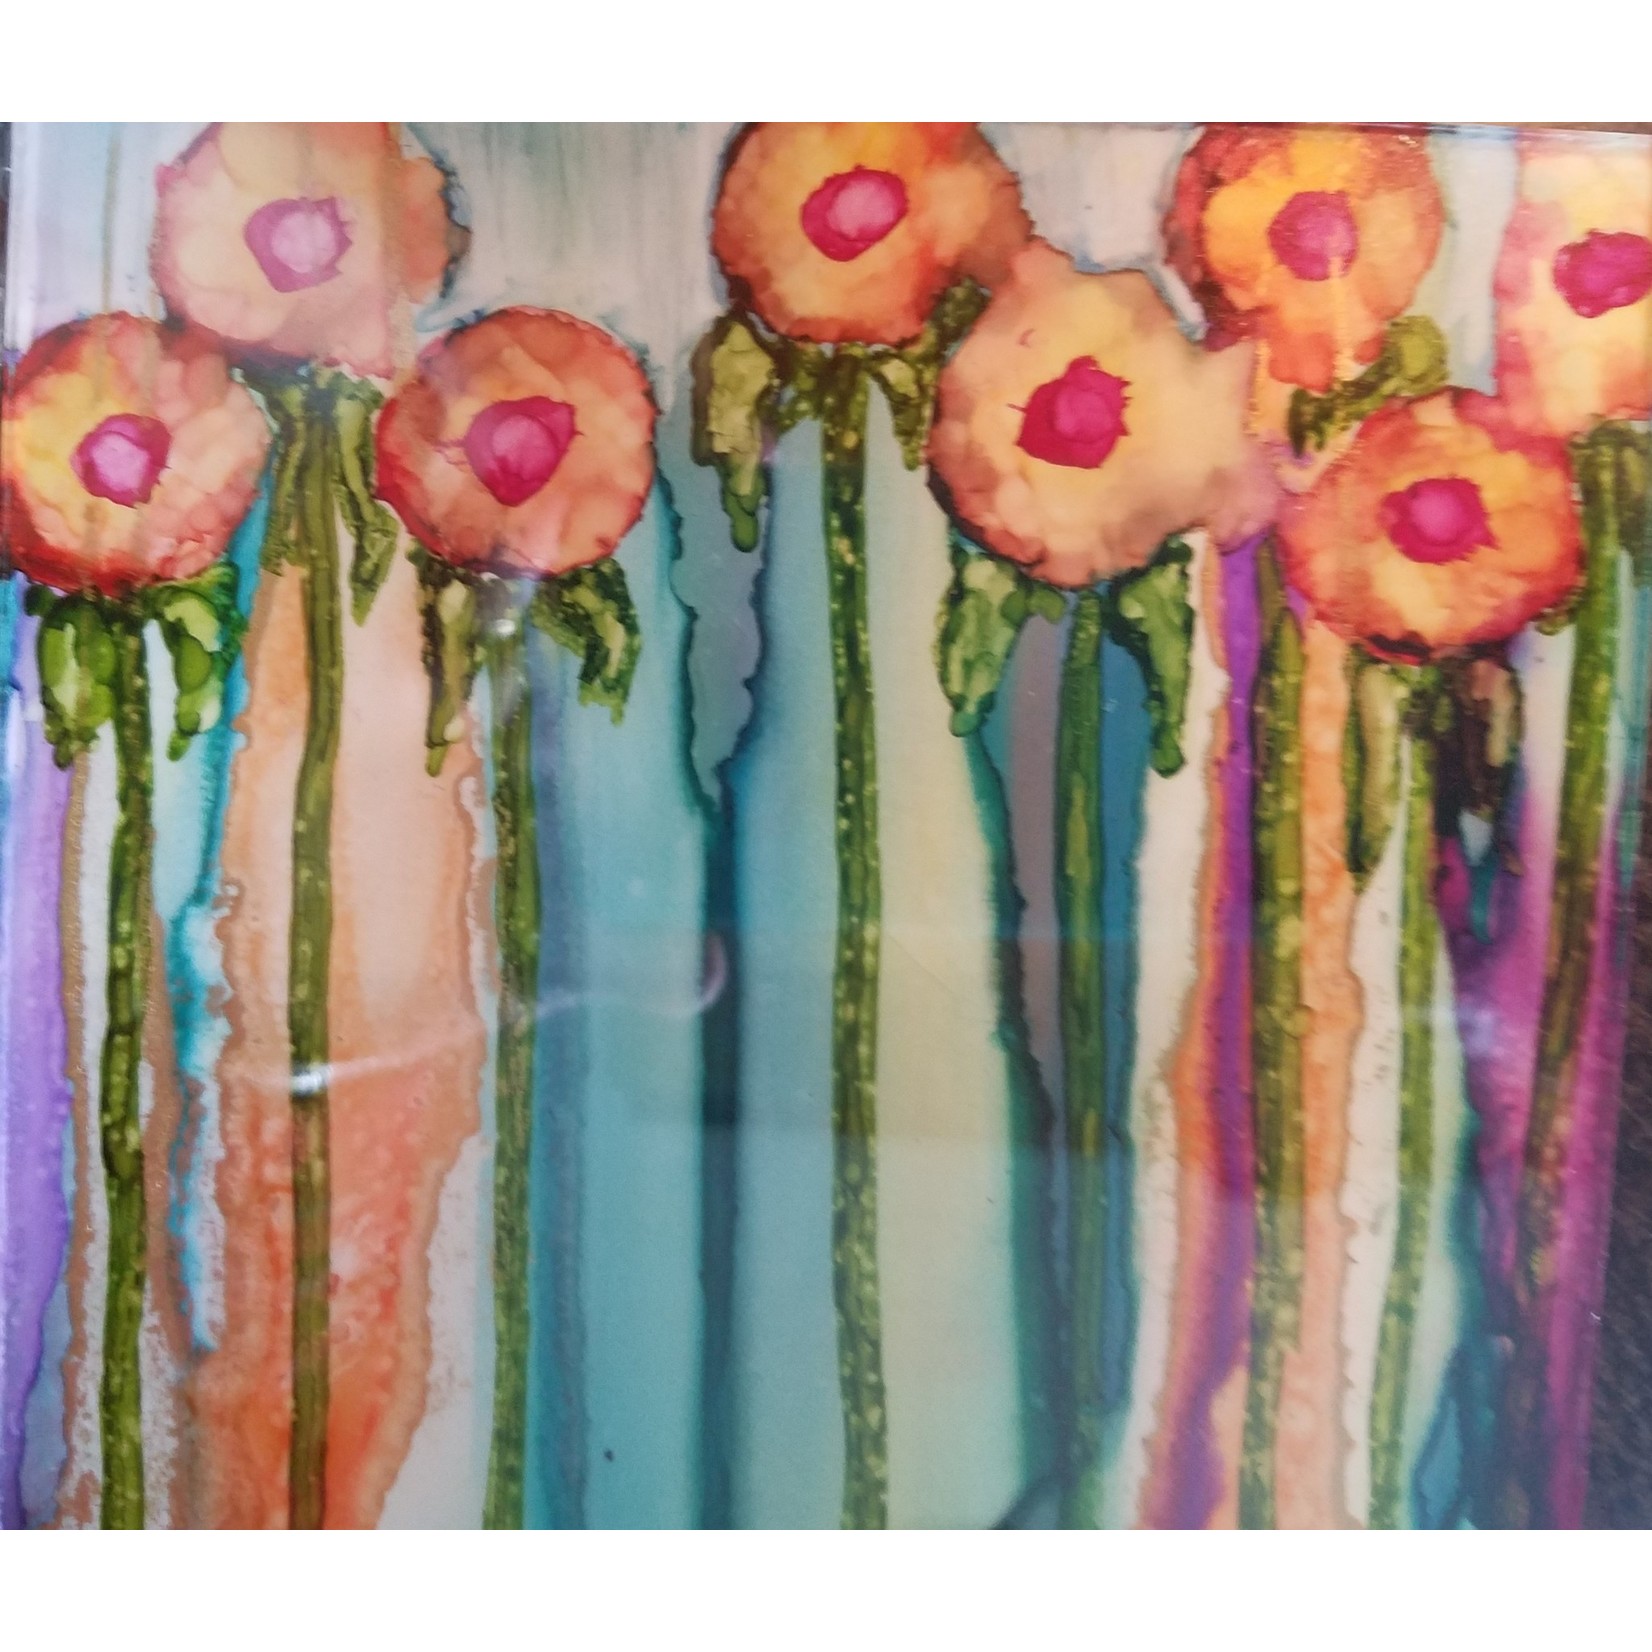 Smith + Trade Mercantile March 25 - Alcohol Ink Painting Class